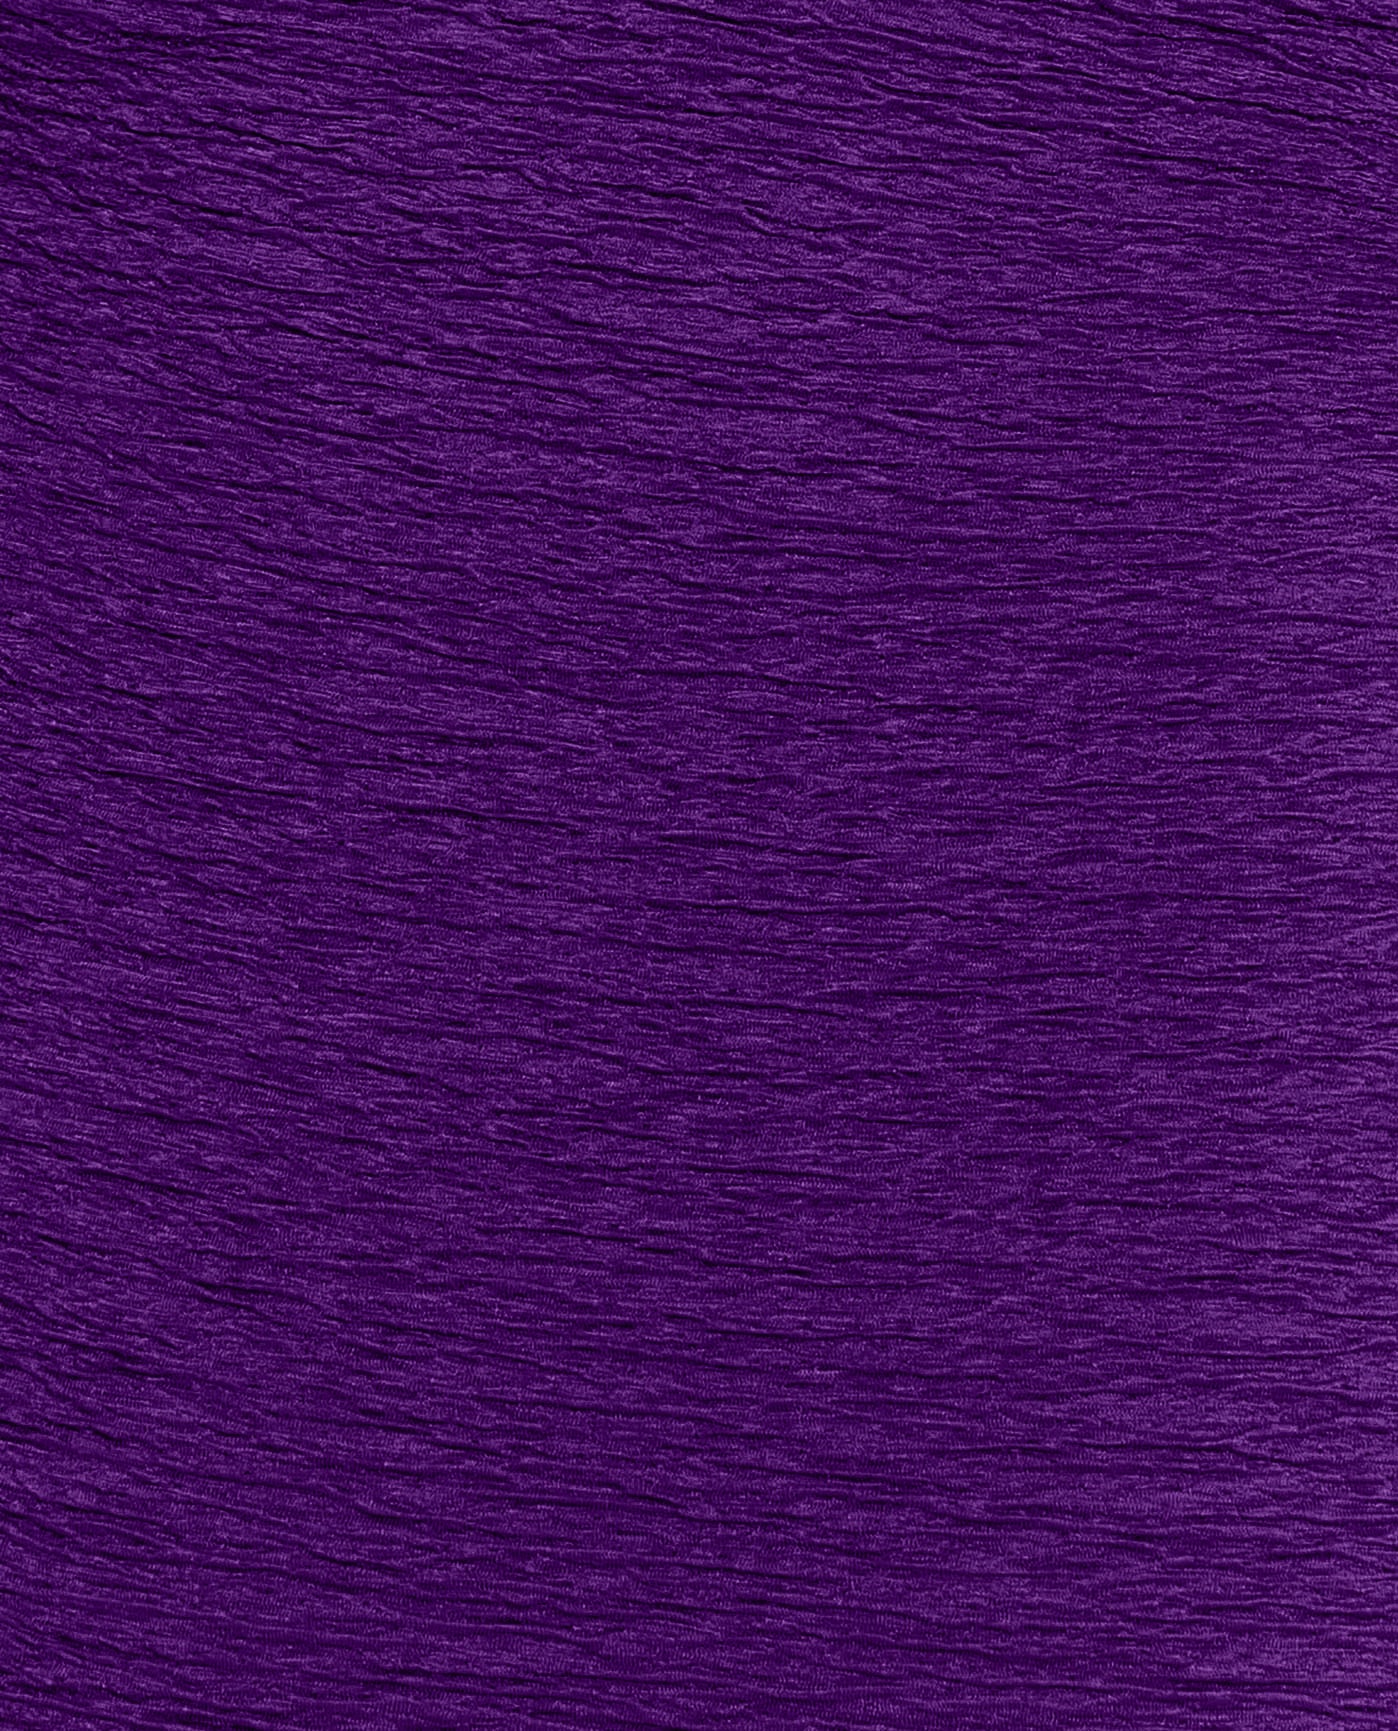 FABRIC DETAIL VIEW OF CHLORINE RESISTANT KRINKLE TEXTURED SOLID HIGH NECK ONE PIECE | KRINKLE ACAI PURPLE